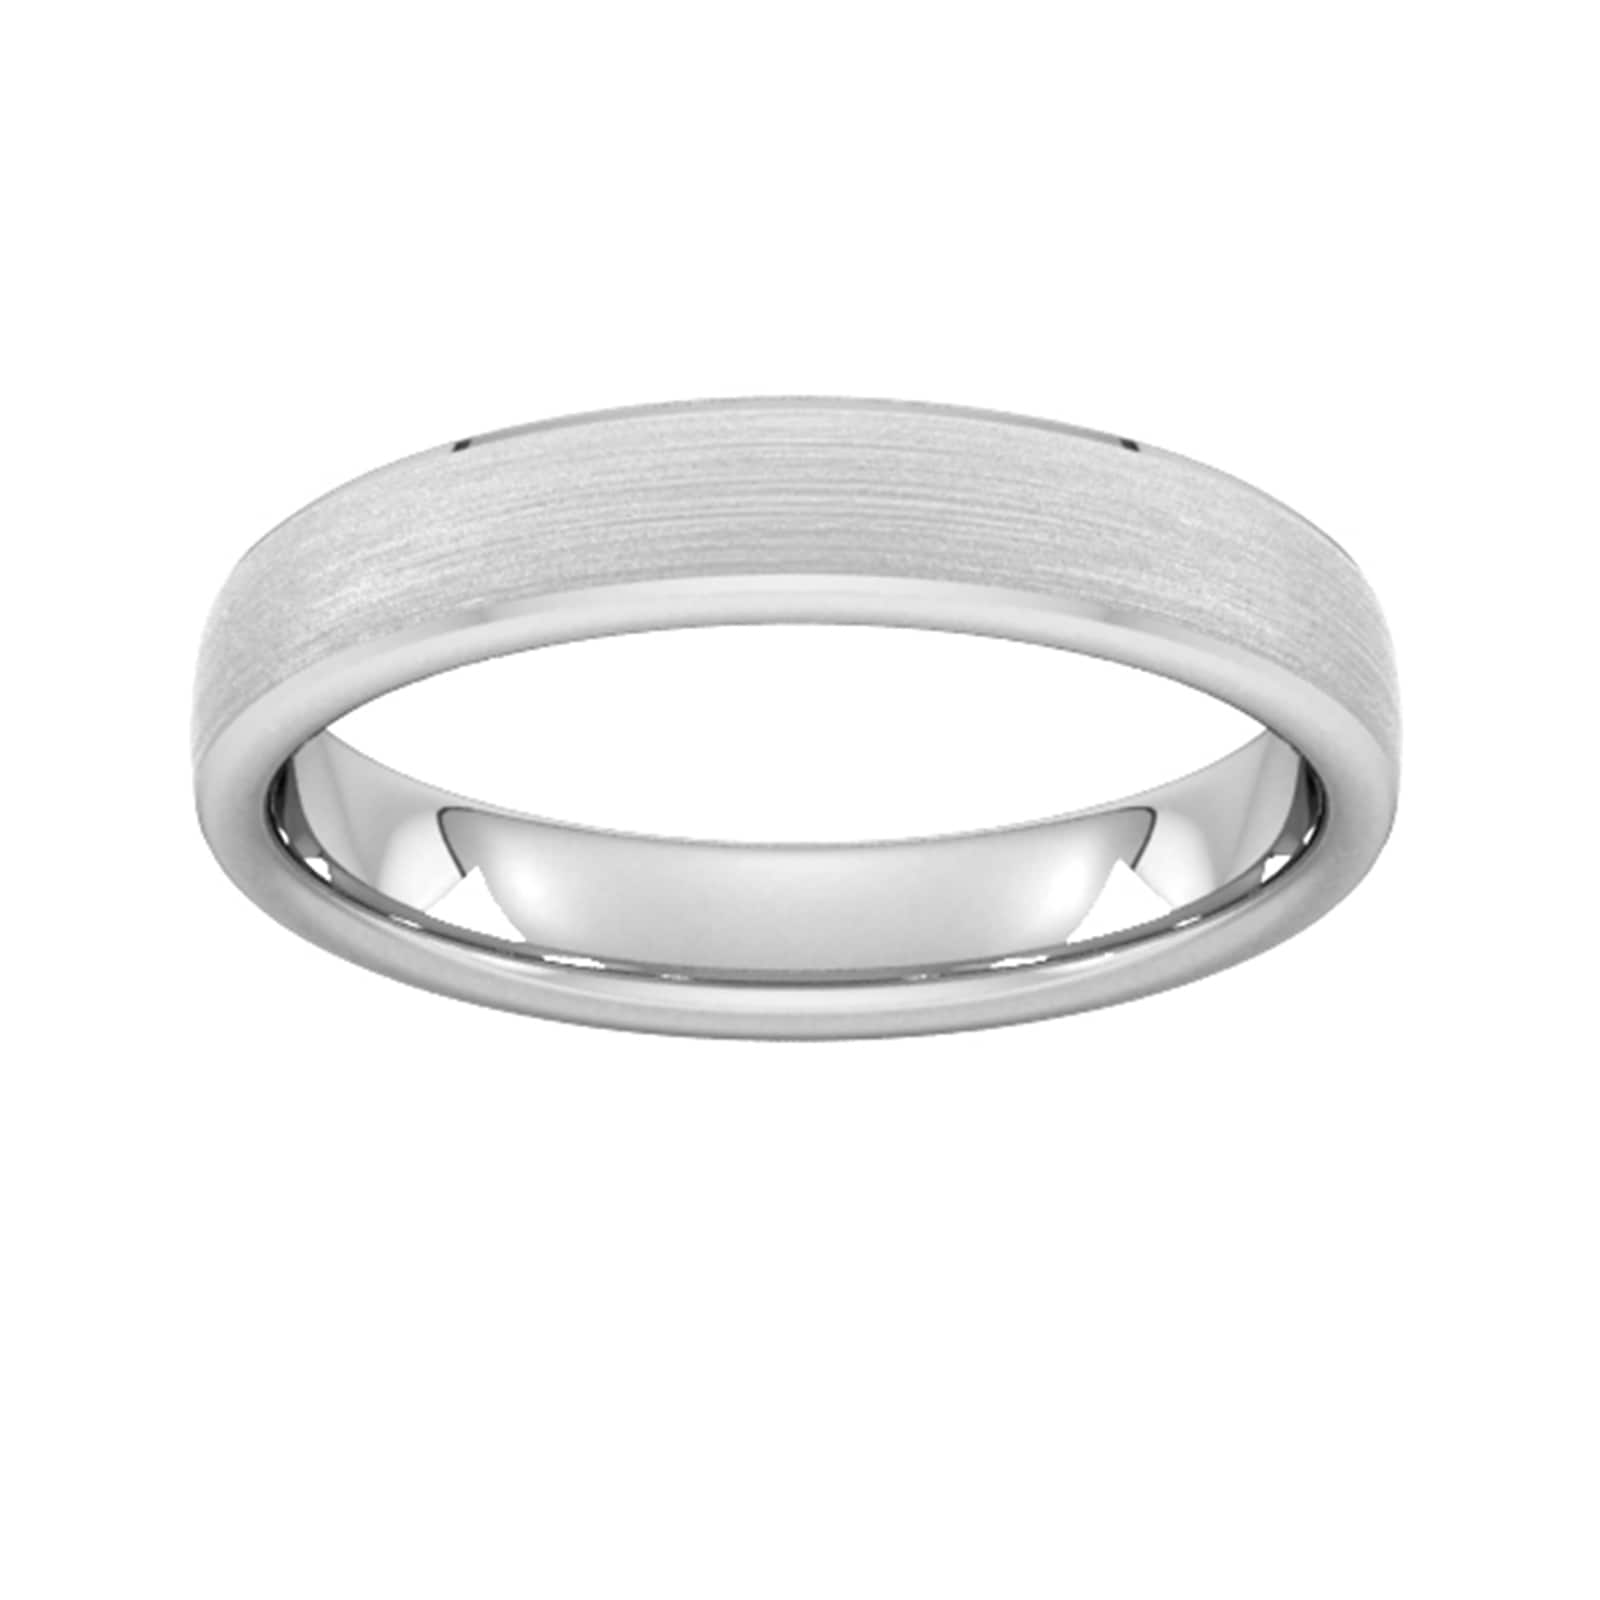 4mm D Shape Heavy Polished Chamfered Edges With Matt Centre Wedding Ring In 18 Carat White Gold - Ring Size L